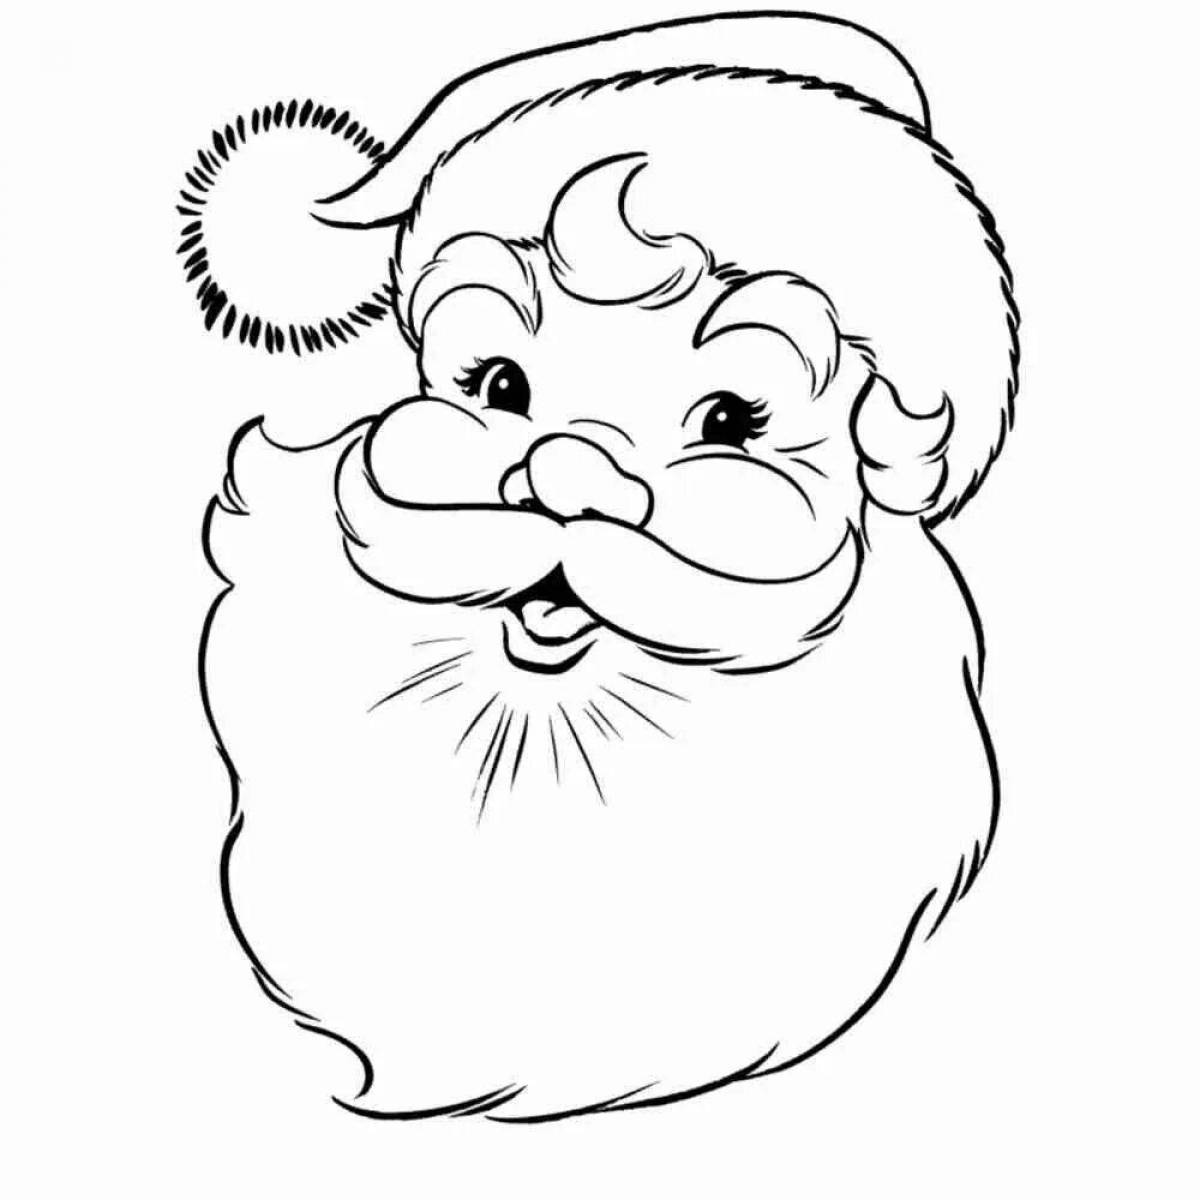 Outstanding santa claus coloring book for kids